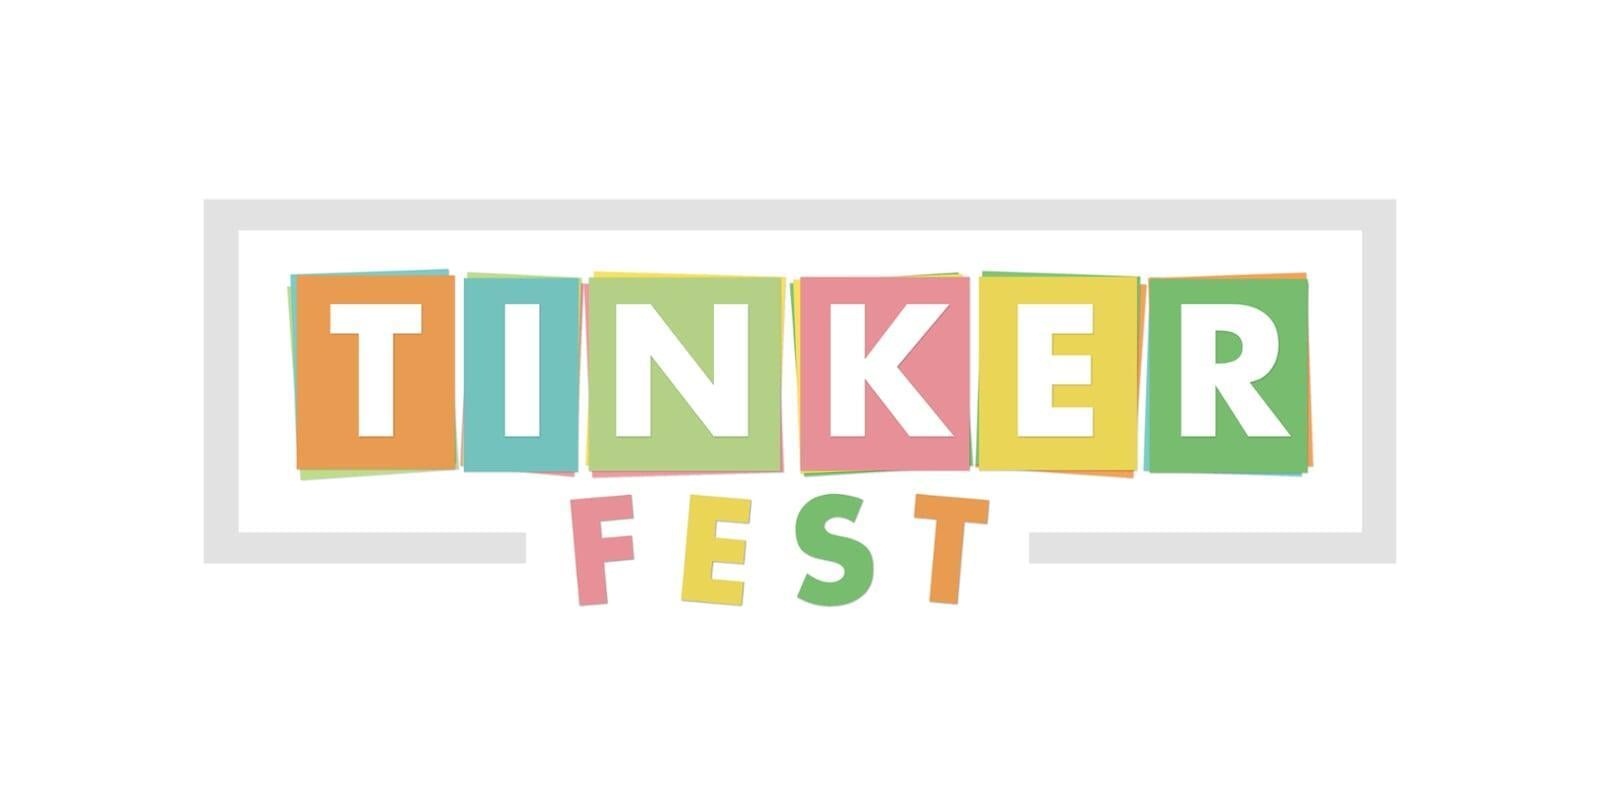 Atal Tinkers Fest